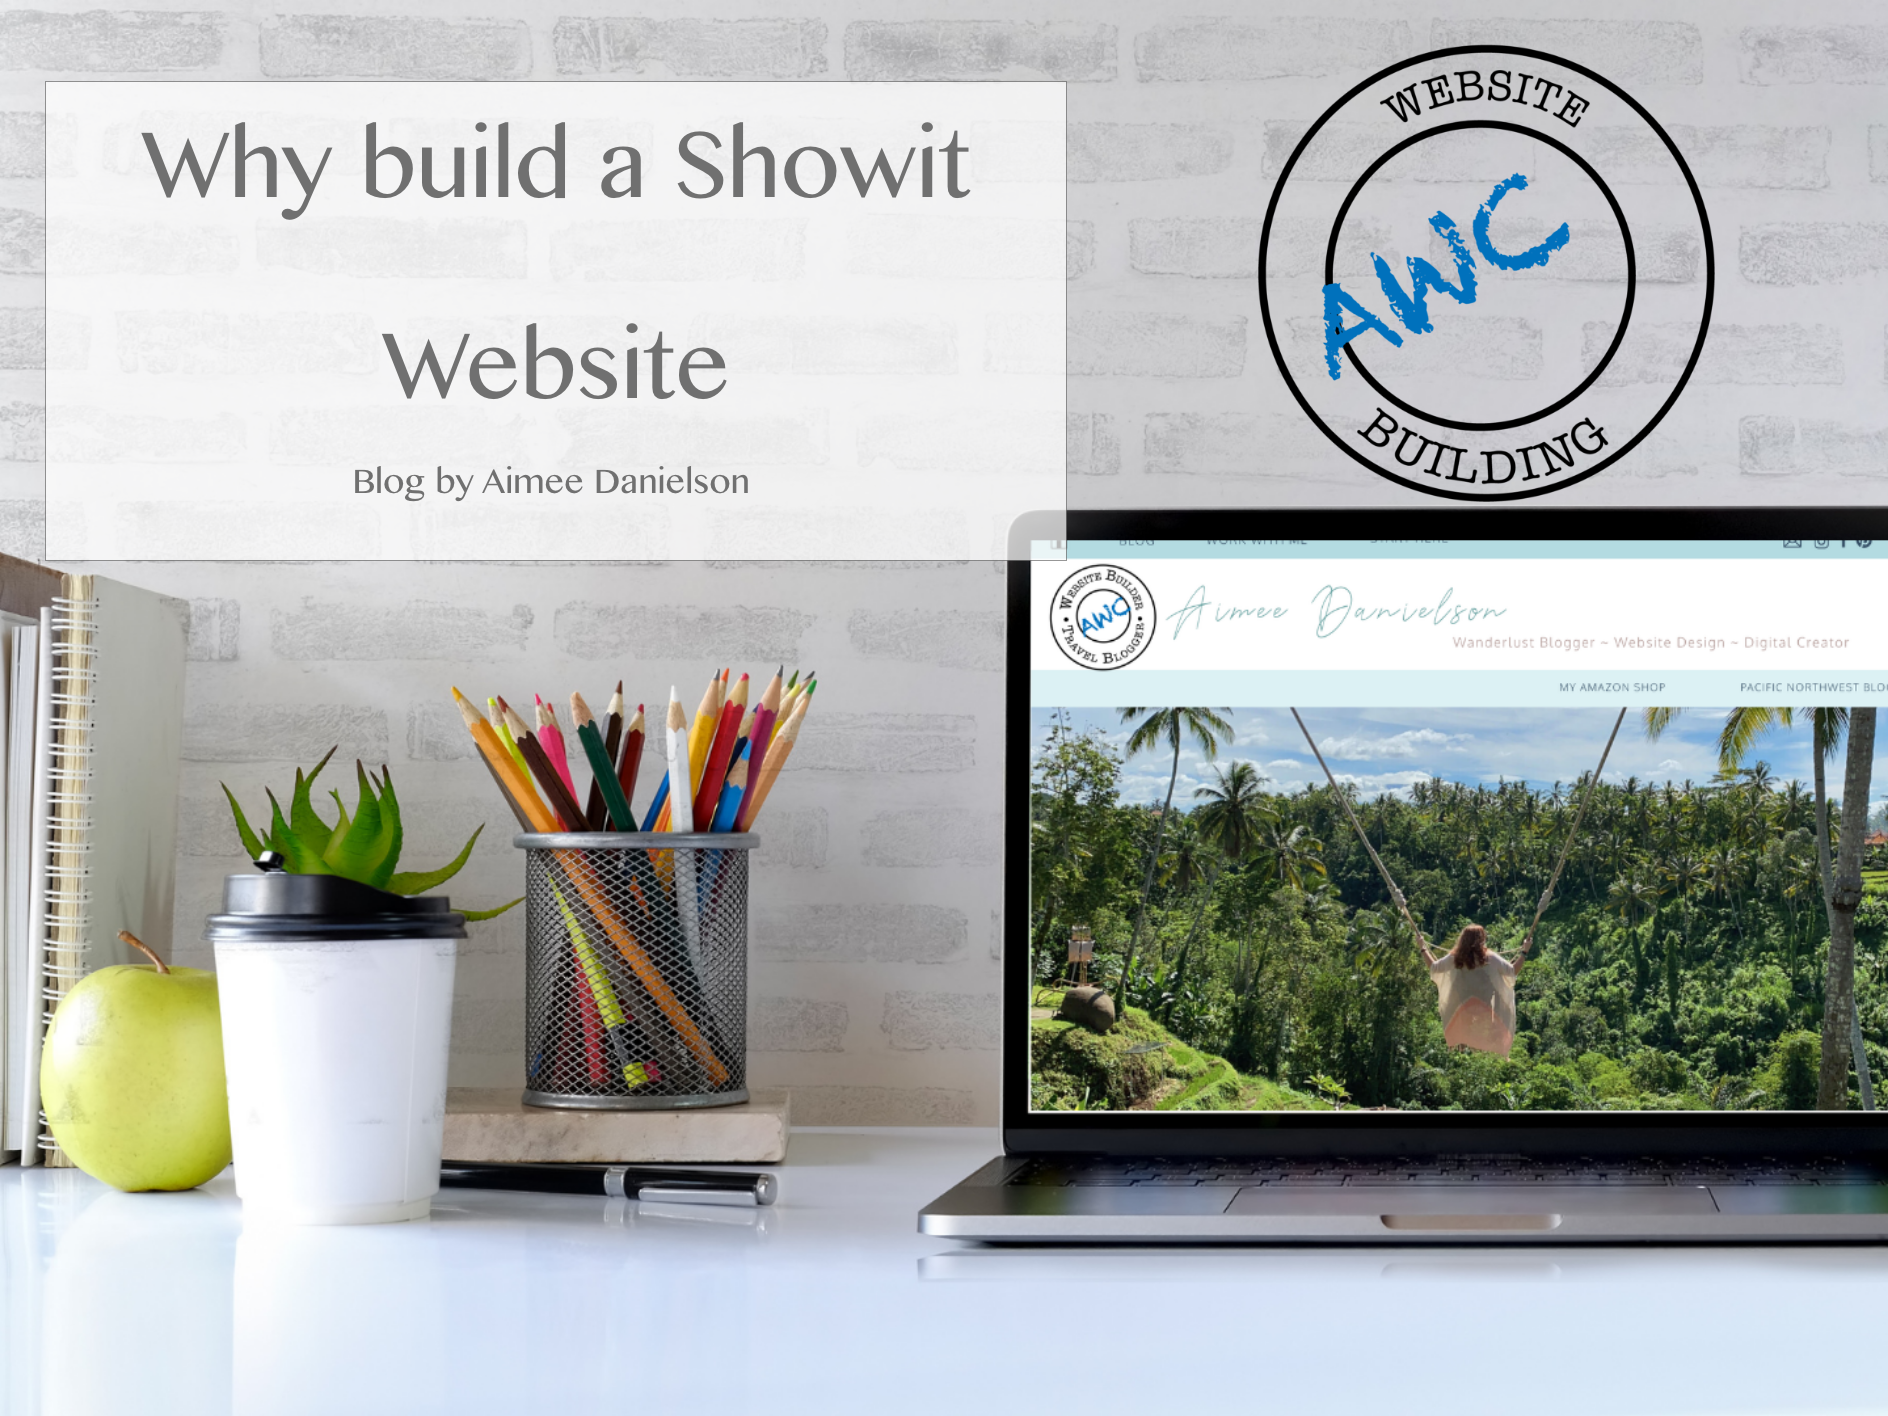 Showit Websites and custom Website Designs. Why I use Showit when building a Custom website design. Hand crafted Websites.